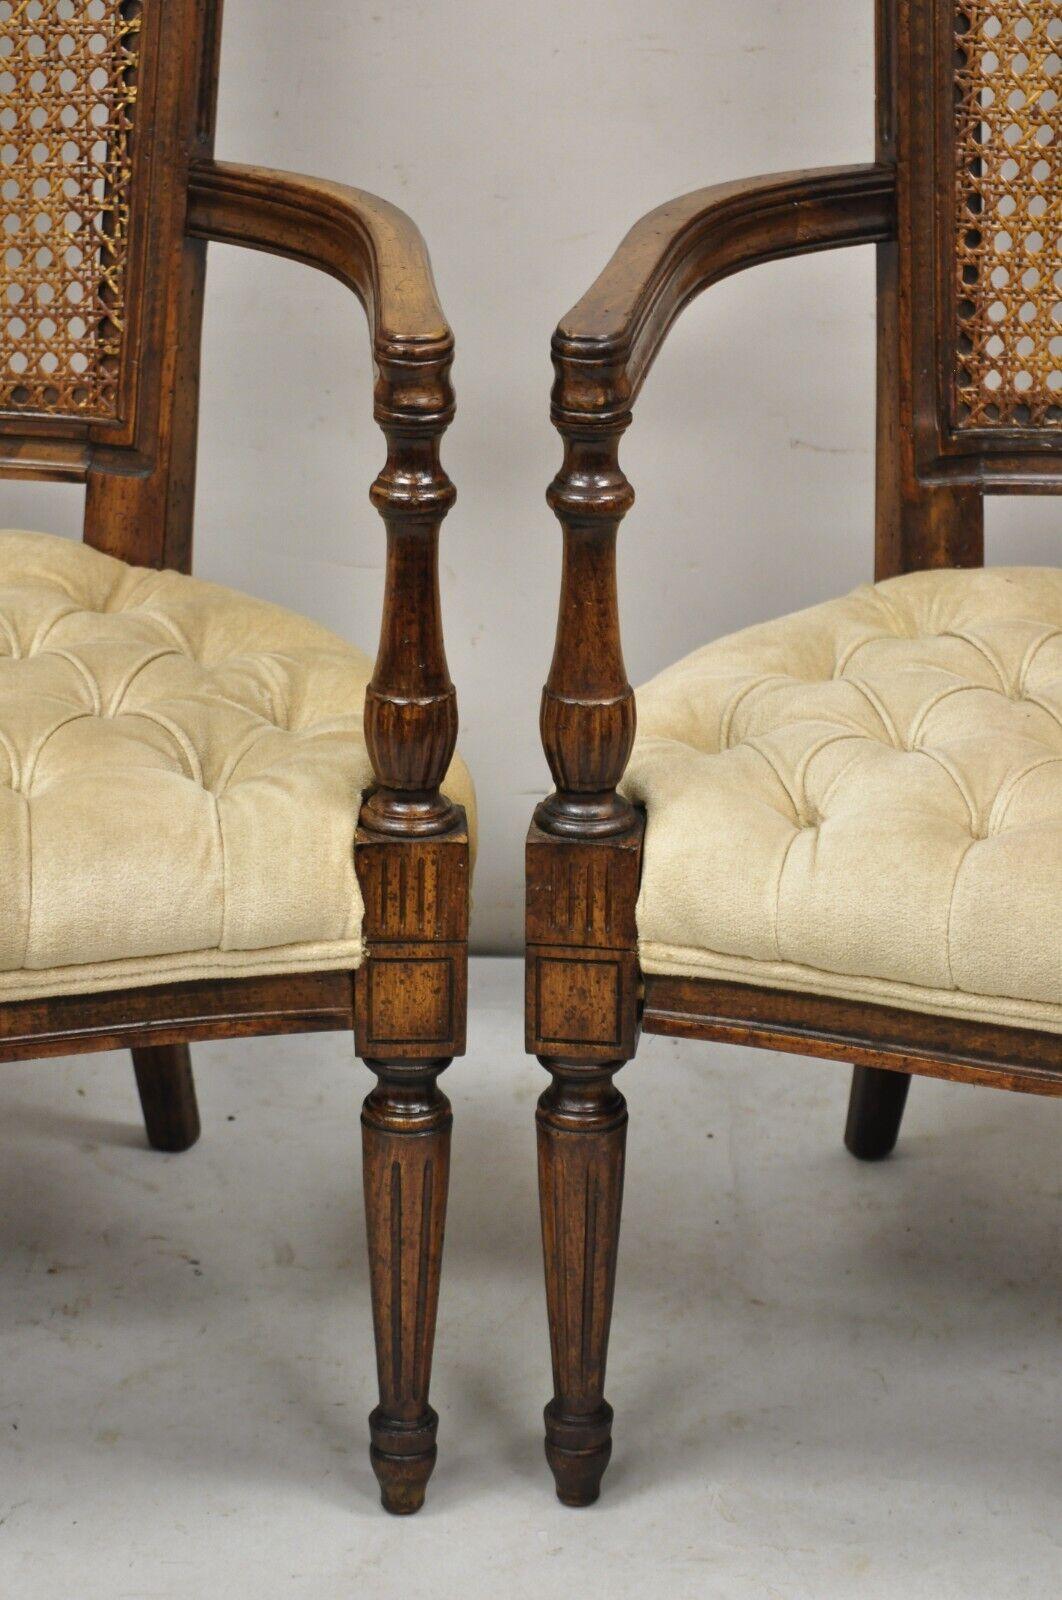 Wood Vintage Hollywood Regency Tall Cane Back Fireside Lounge Armchairs - a Pair For Sale